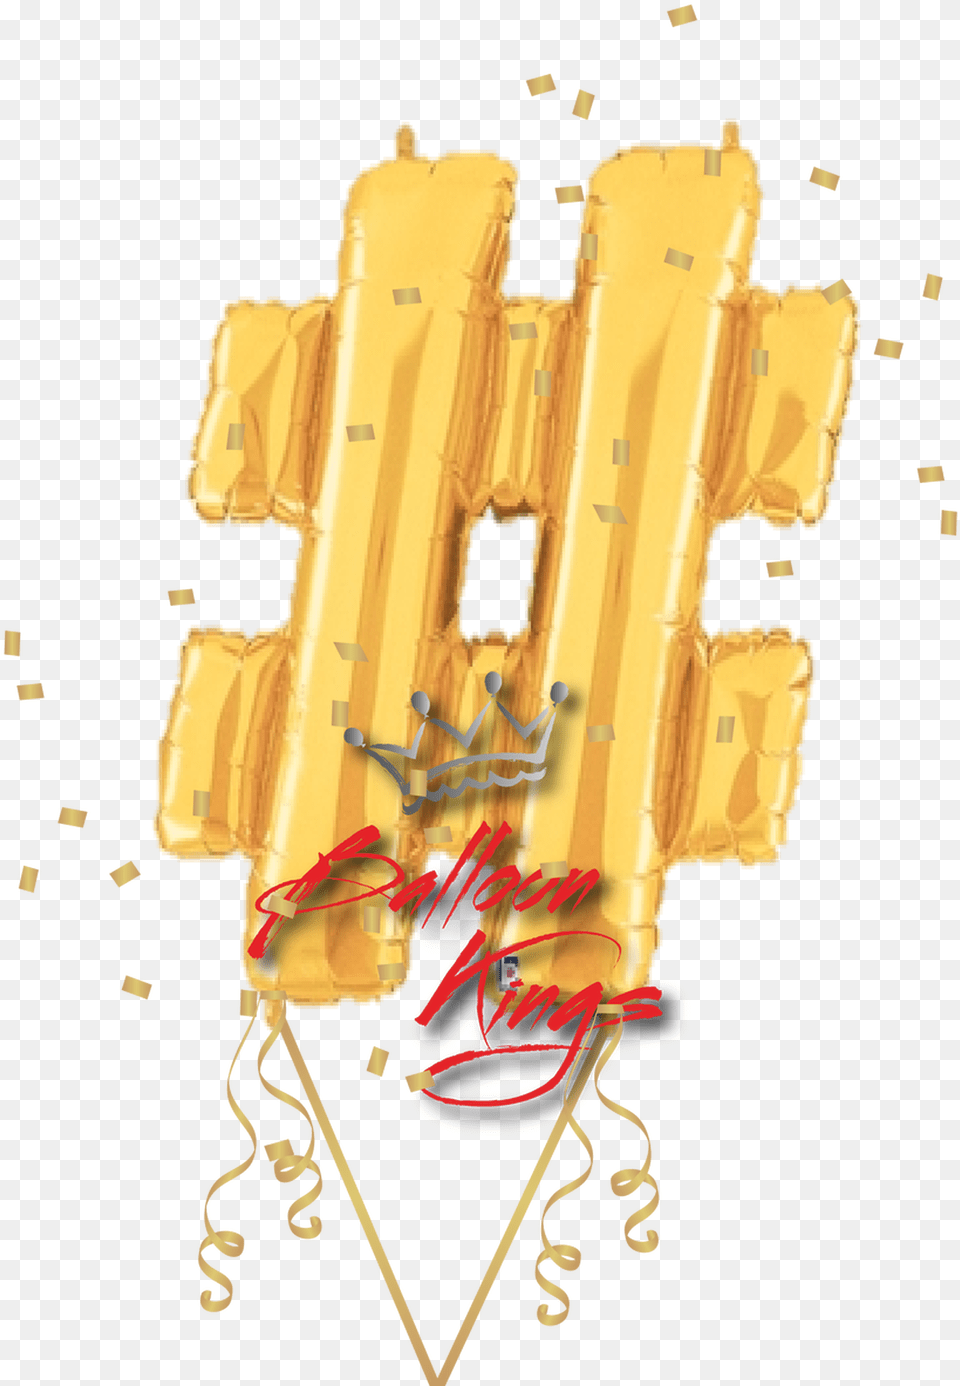 Gold Symbol Hashtag Balloon, Weapon Free Transparent Png